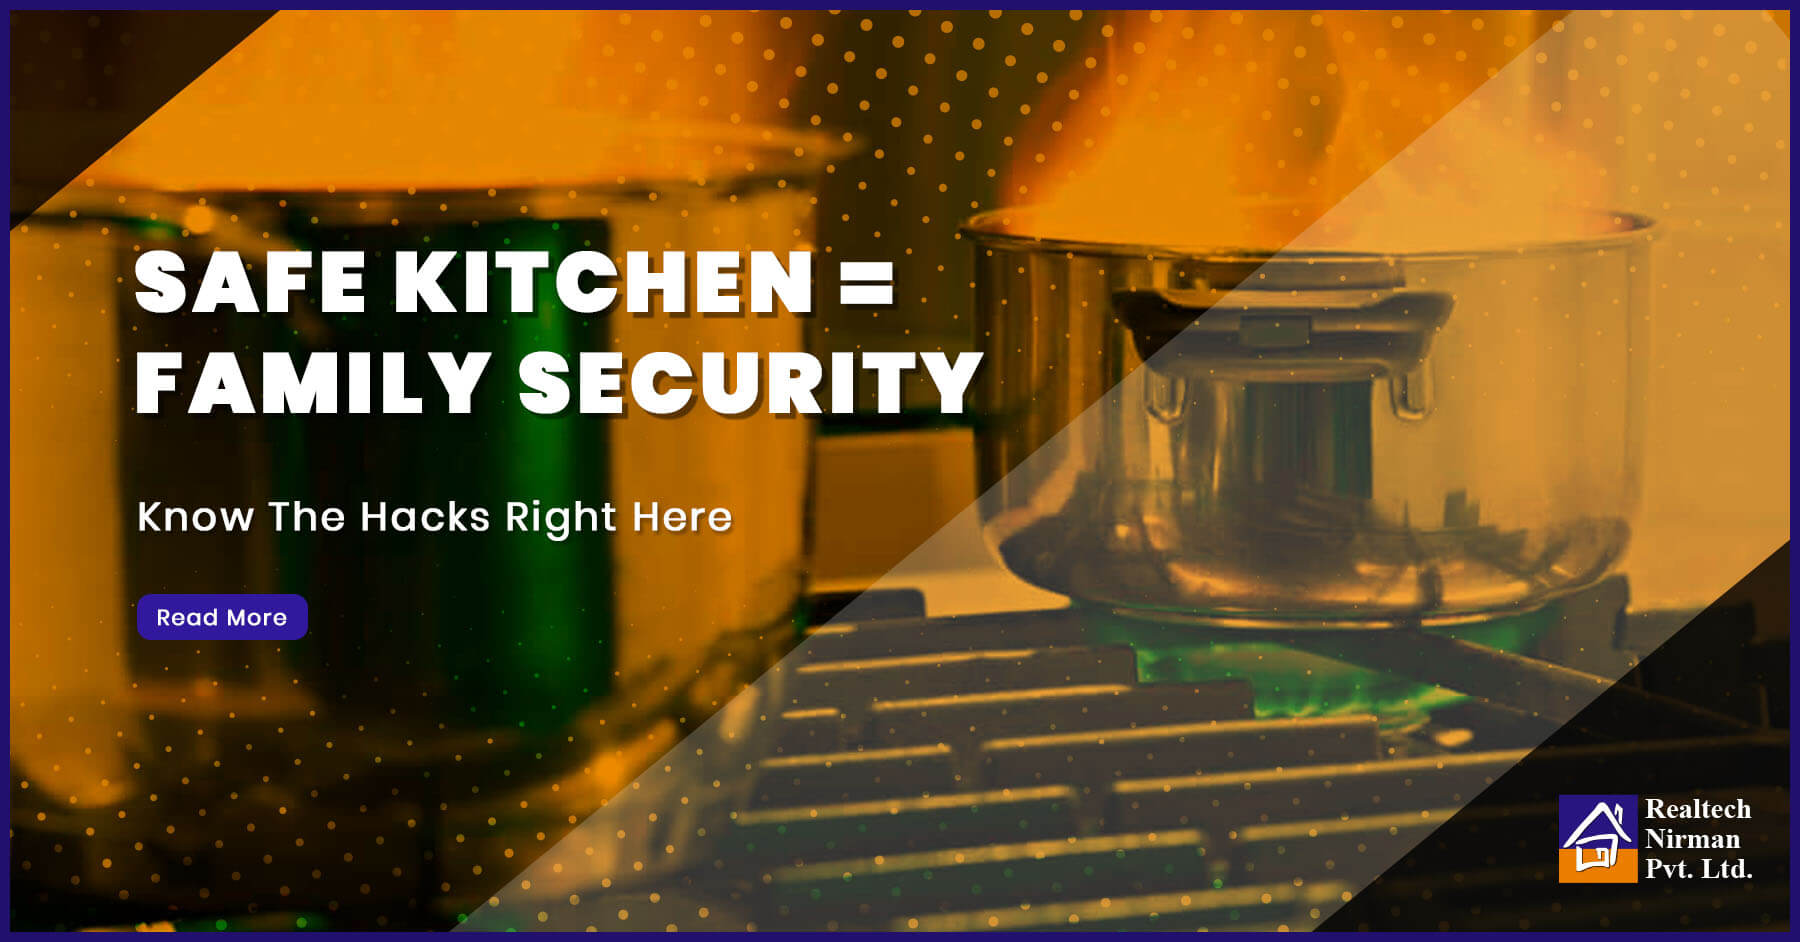 5 Kitchen Safety Rules Must For Every Home